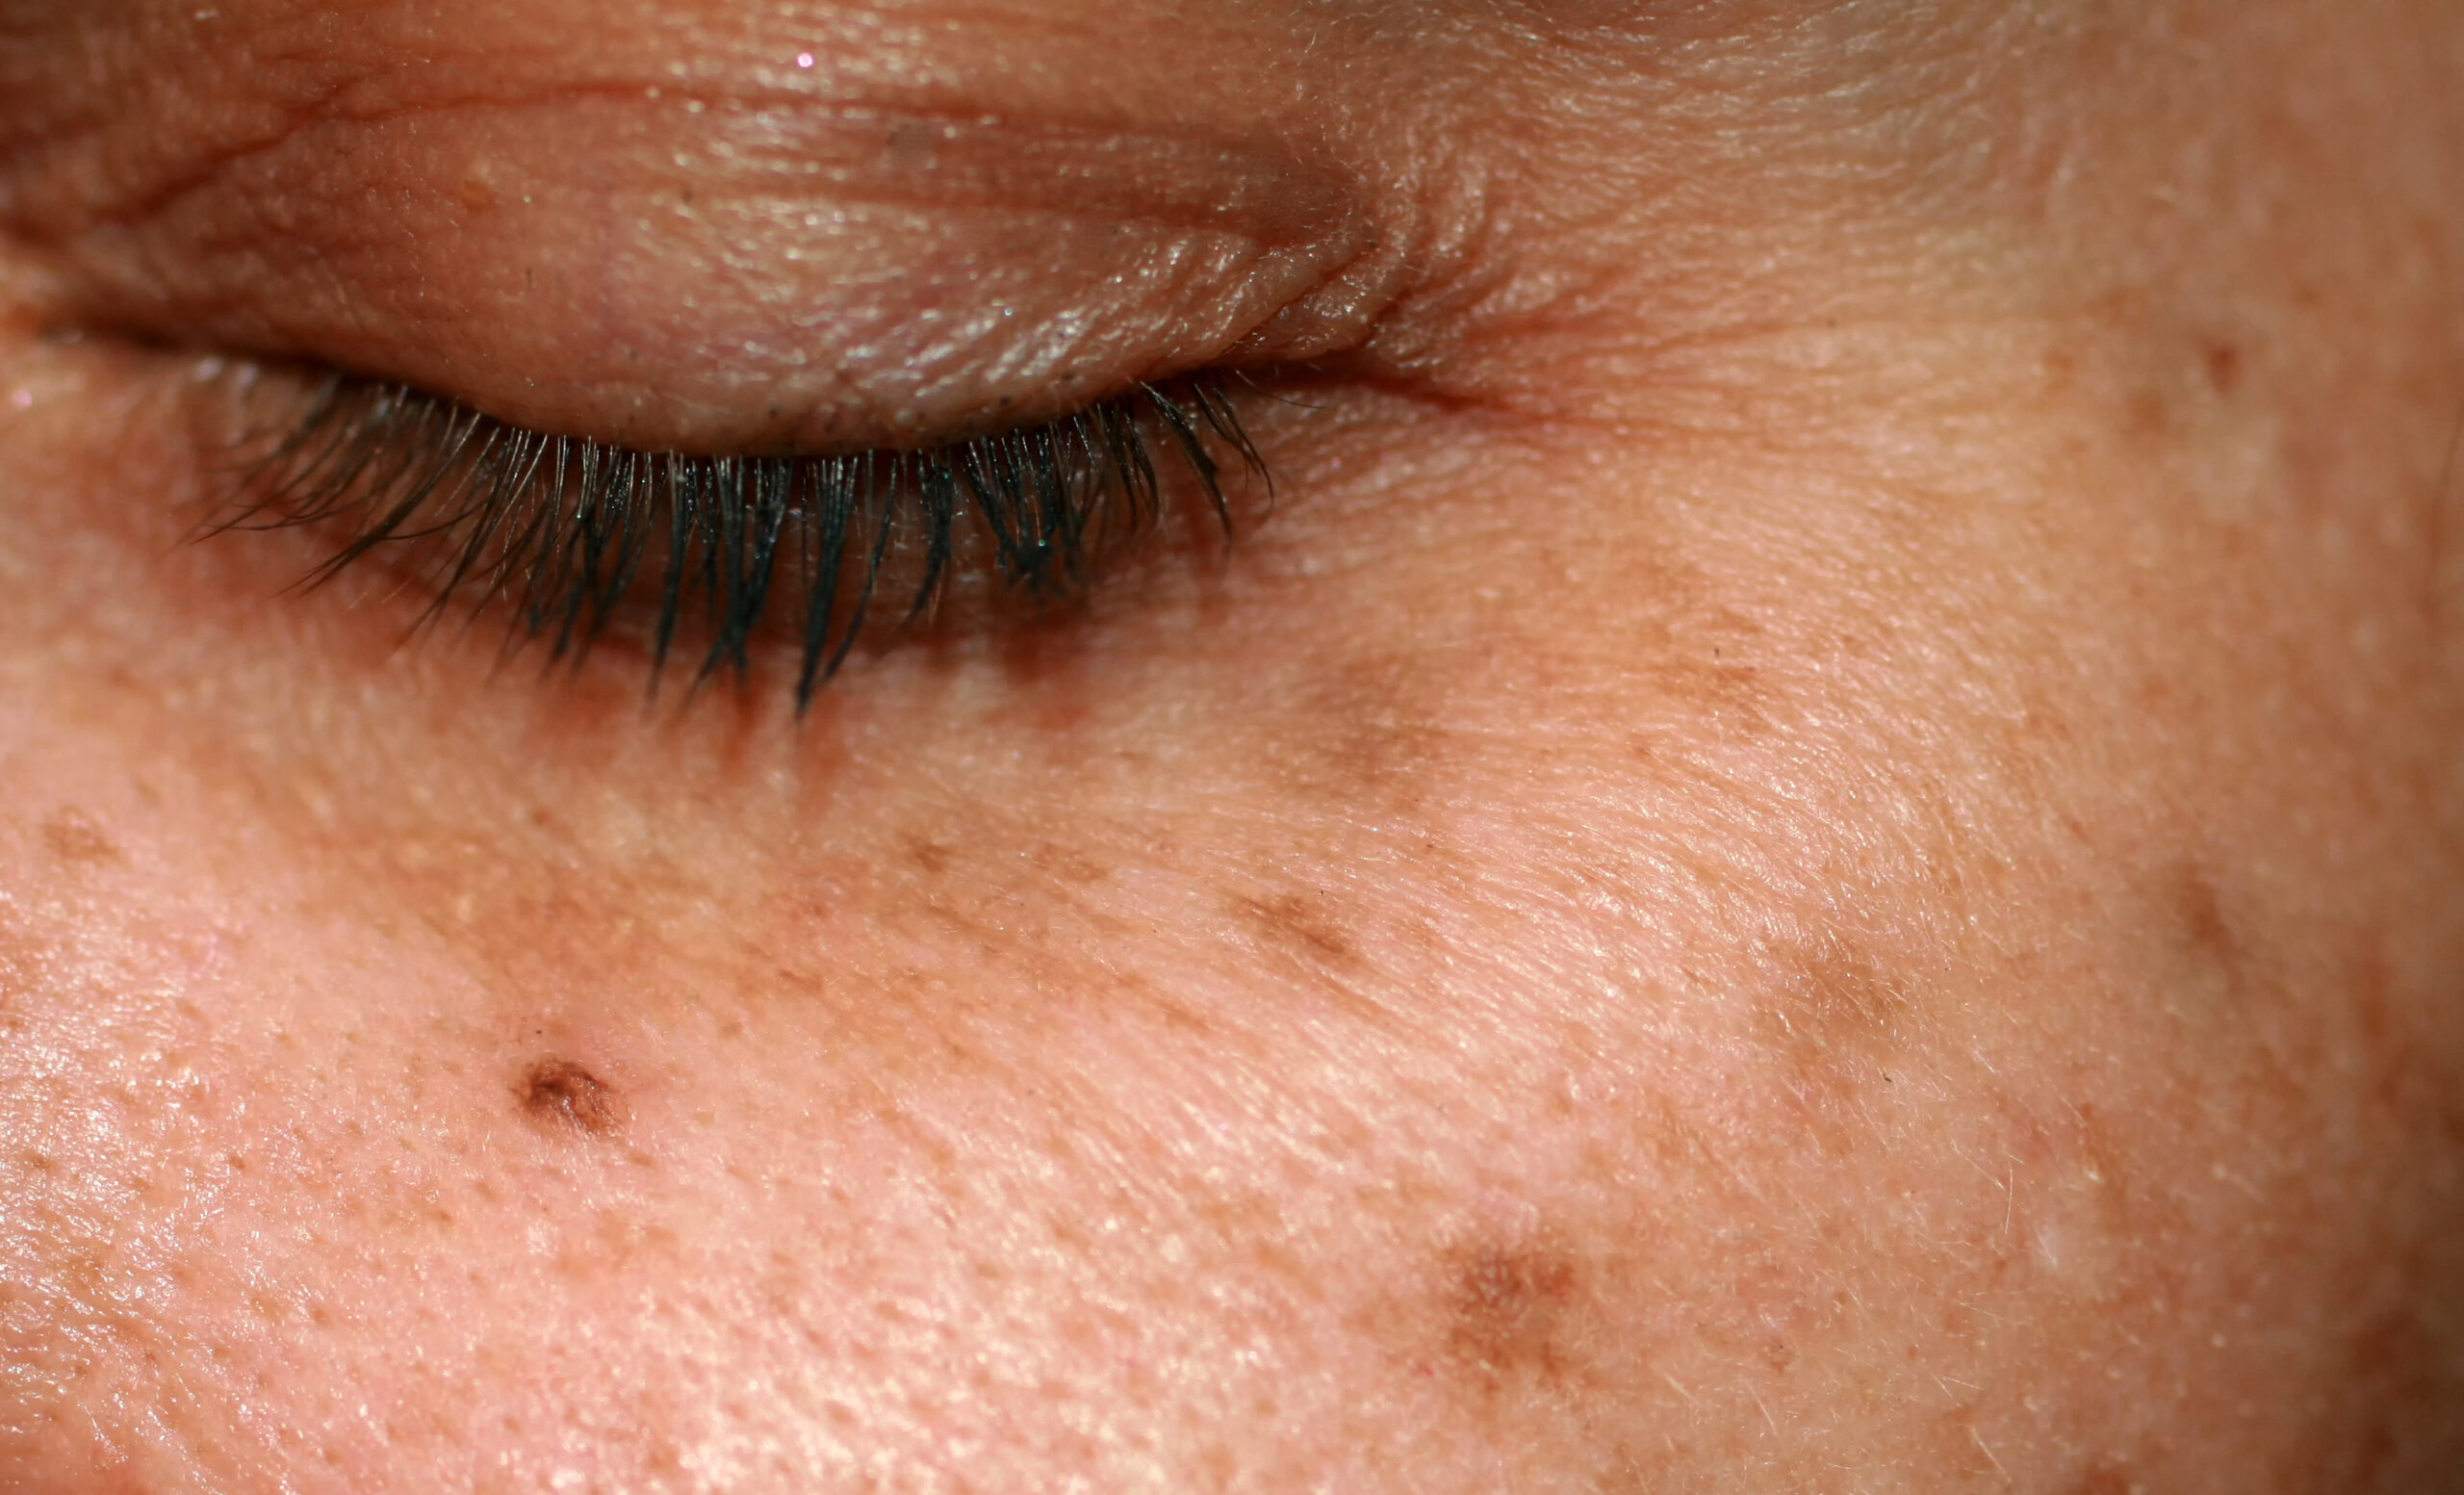 Age spots on the face